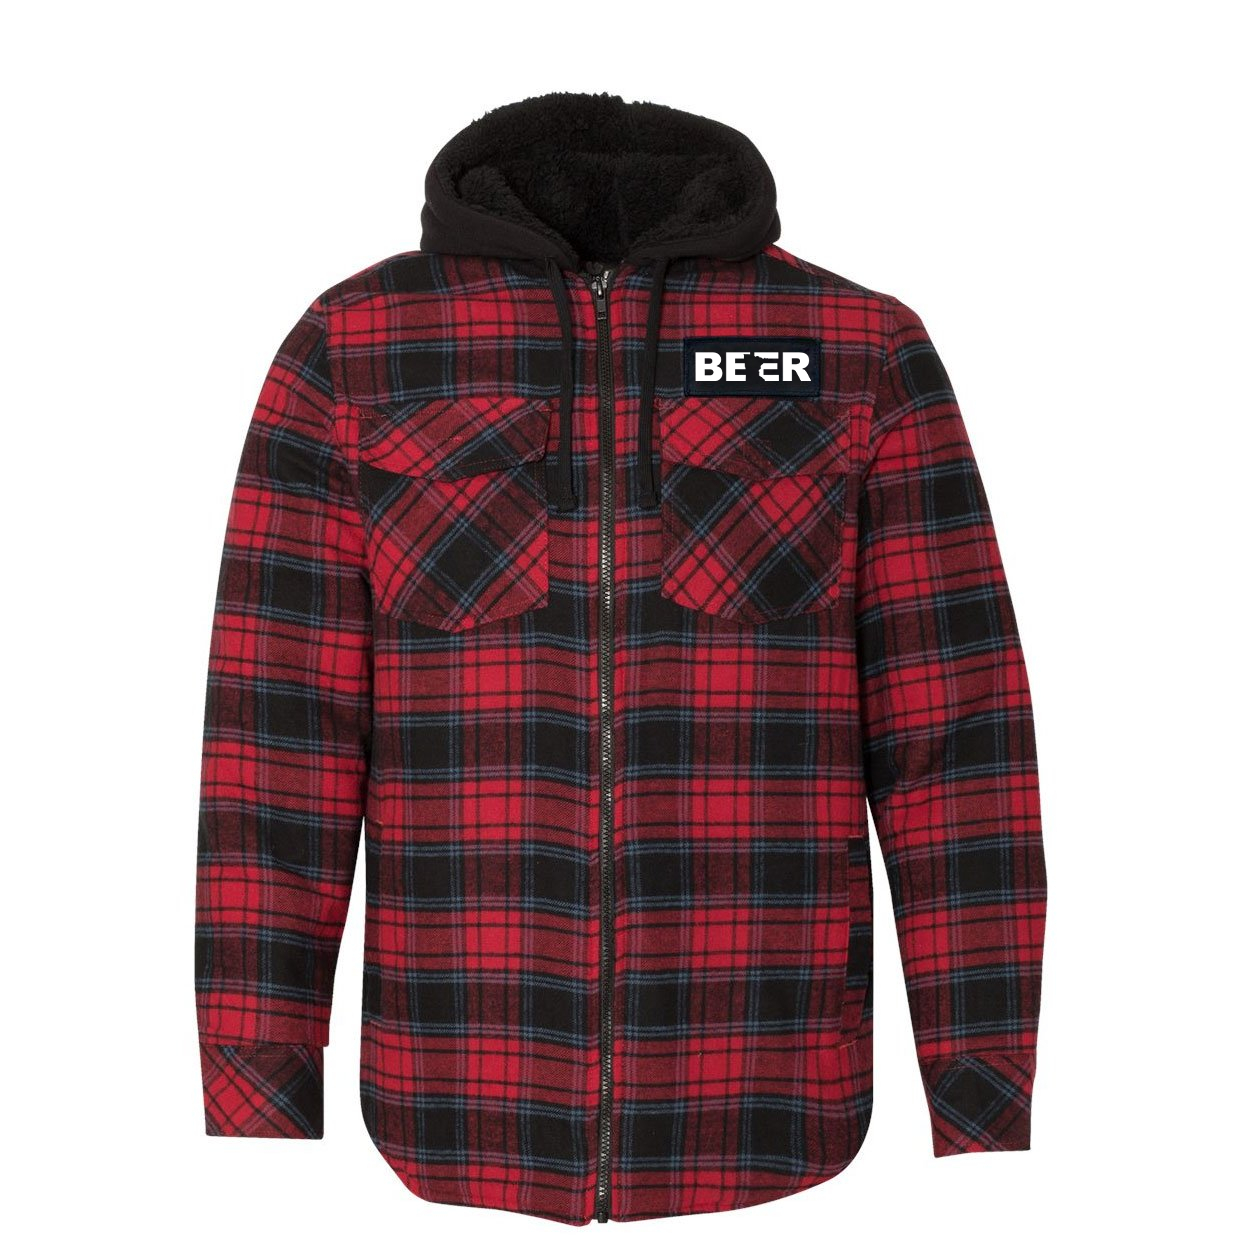 Beer Minnesota Classic Unisex Full Zip Woven Patch Hooded Flannel Jacket Red/Black Buffalo (White Logo)